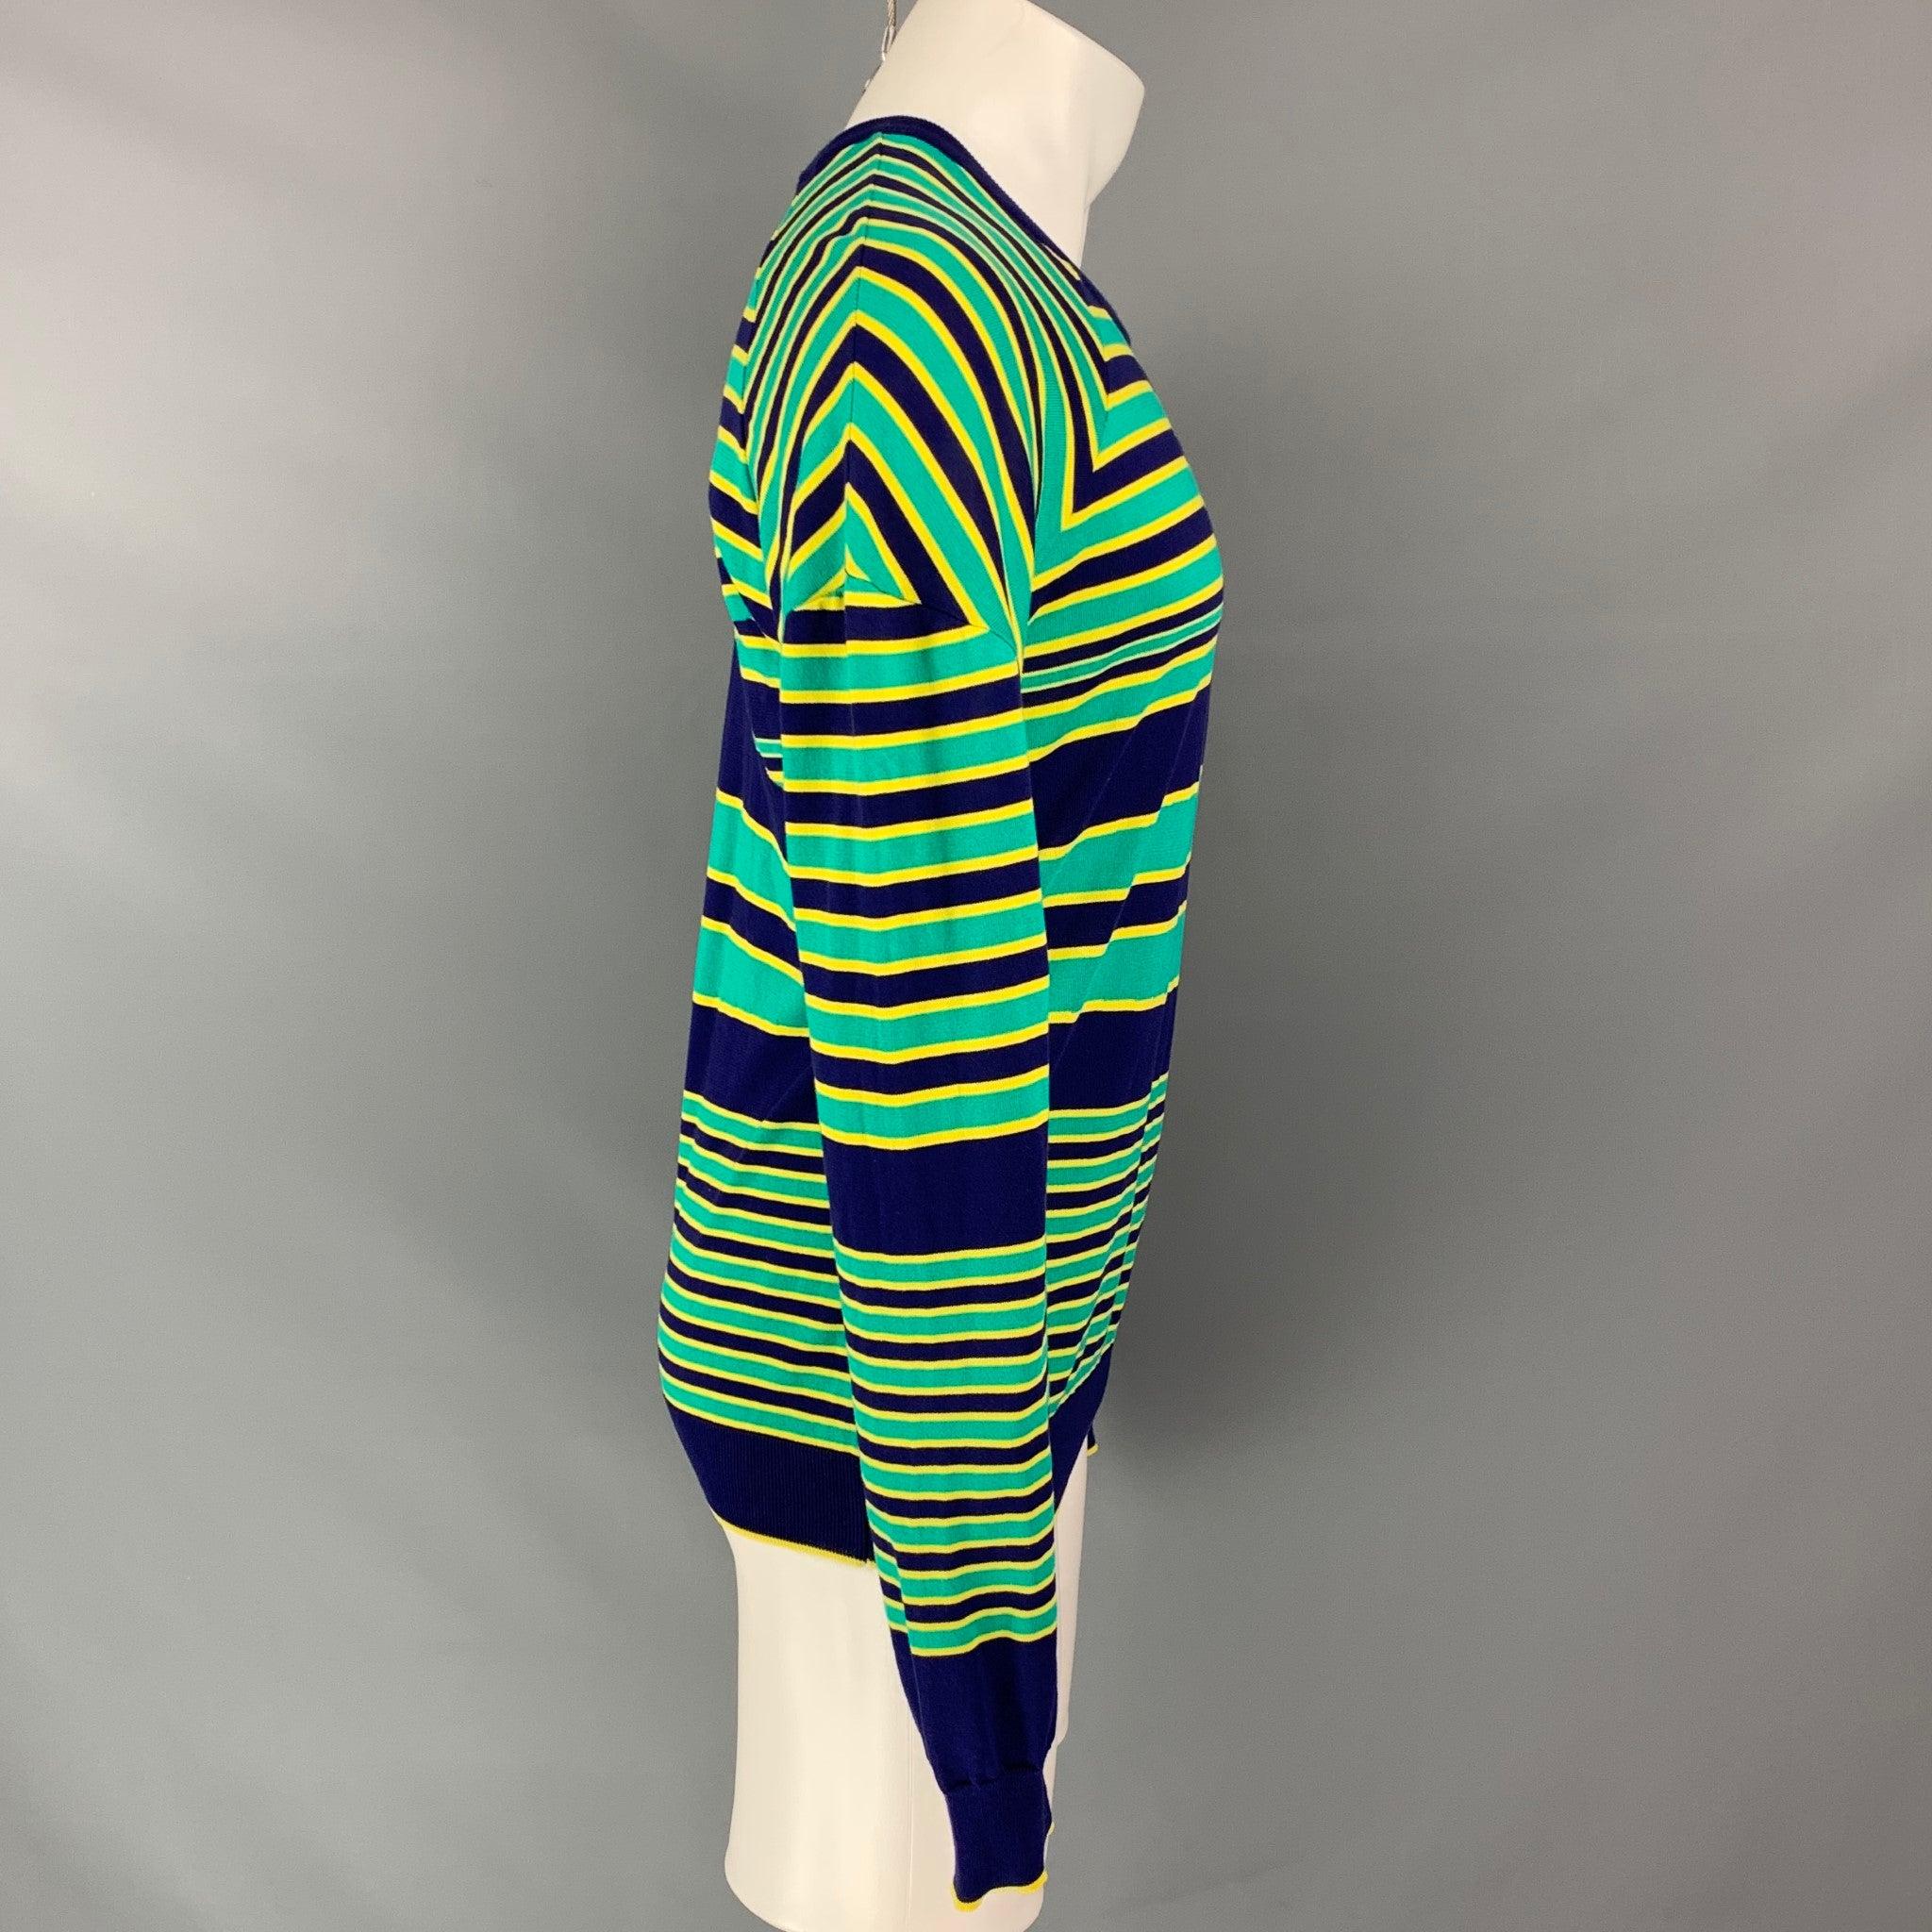 JIL SANDER x RAF SIMONS SS 11 pullover comes in a multi-color stripe cotton featuring a ribbed hem and a crew-neck. Made in Italy.New With Tags.
 

Marked:   50 

Measurements: 
 
Shoulder:
25 inches  Chest: 40 inches  Sleeve: 25 inches  Length: